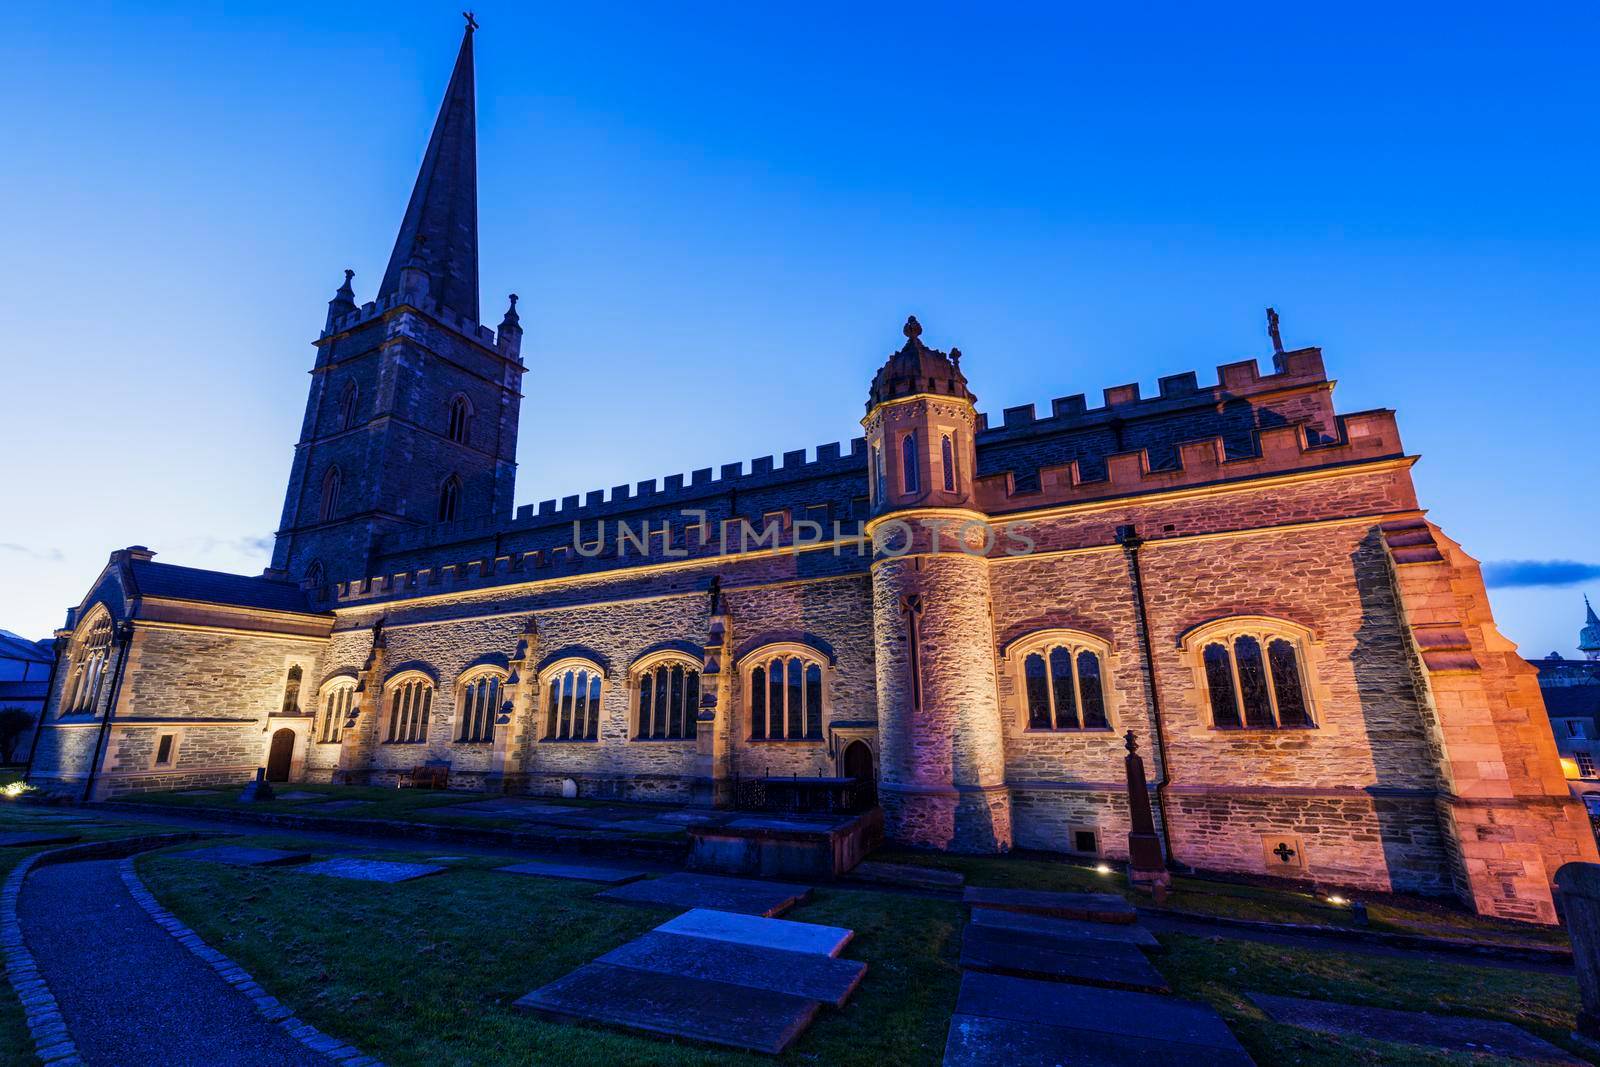 St. Columb's Cathedral in Derry. Derry, Northern Ireland, United Kingdom.